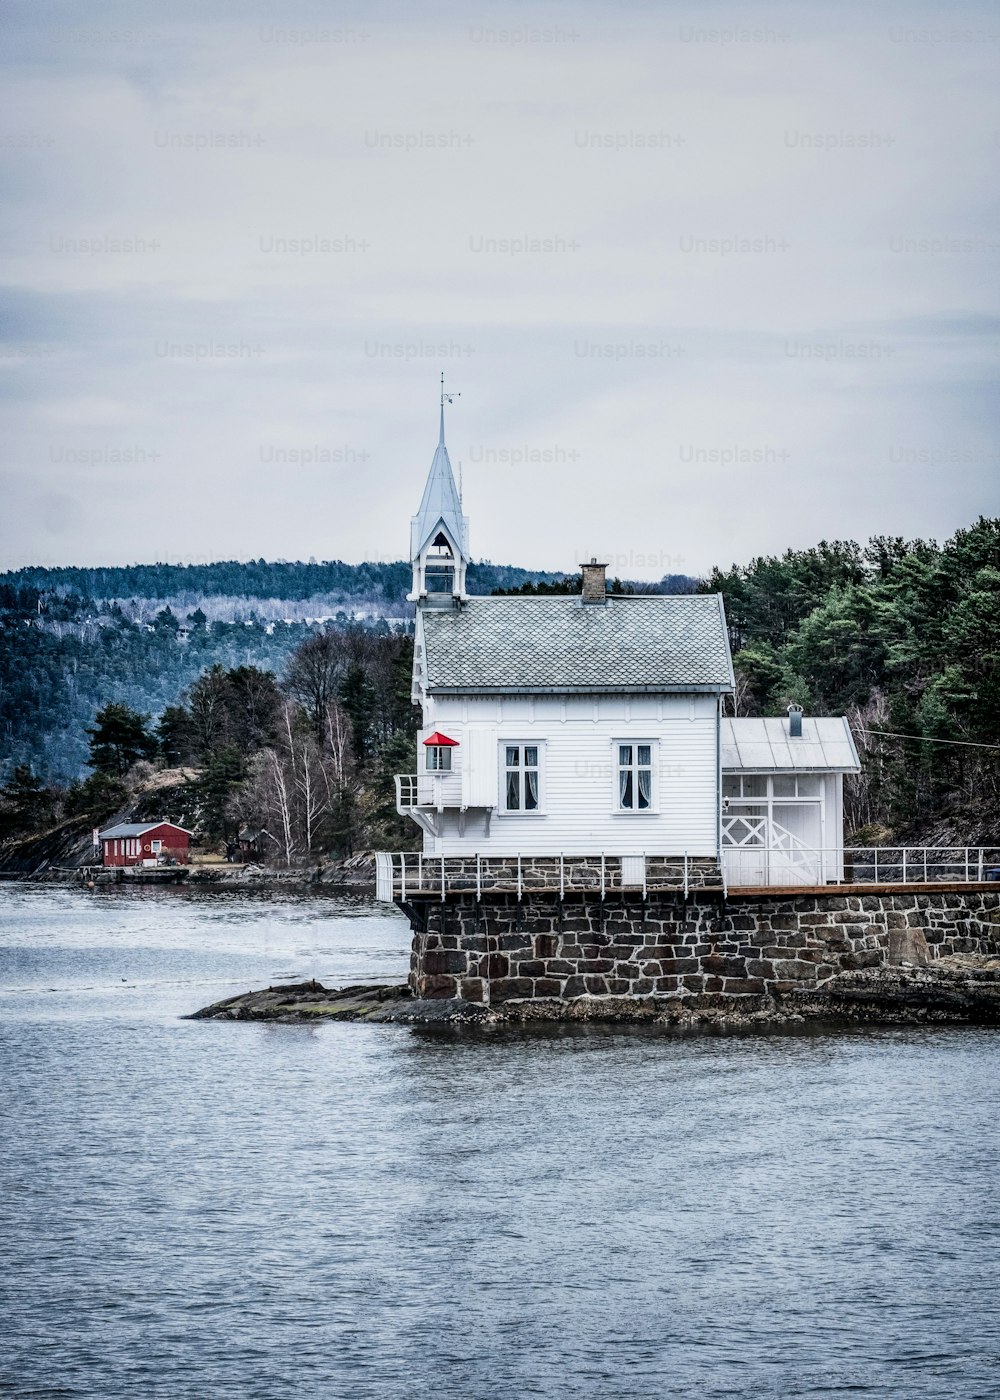 The historic Heggholmen wooden lighthouse at Oslofjord at the mouth of Oslo harbor